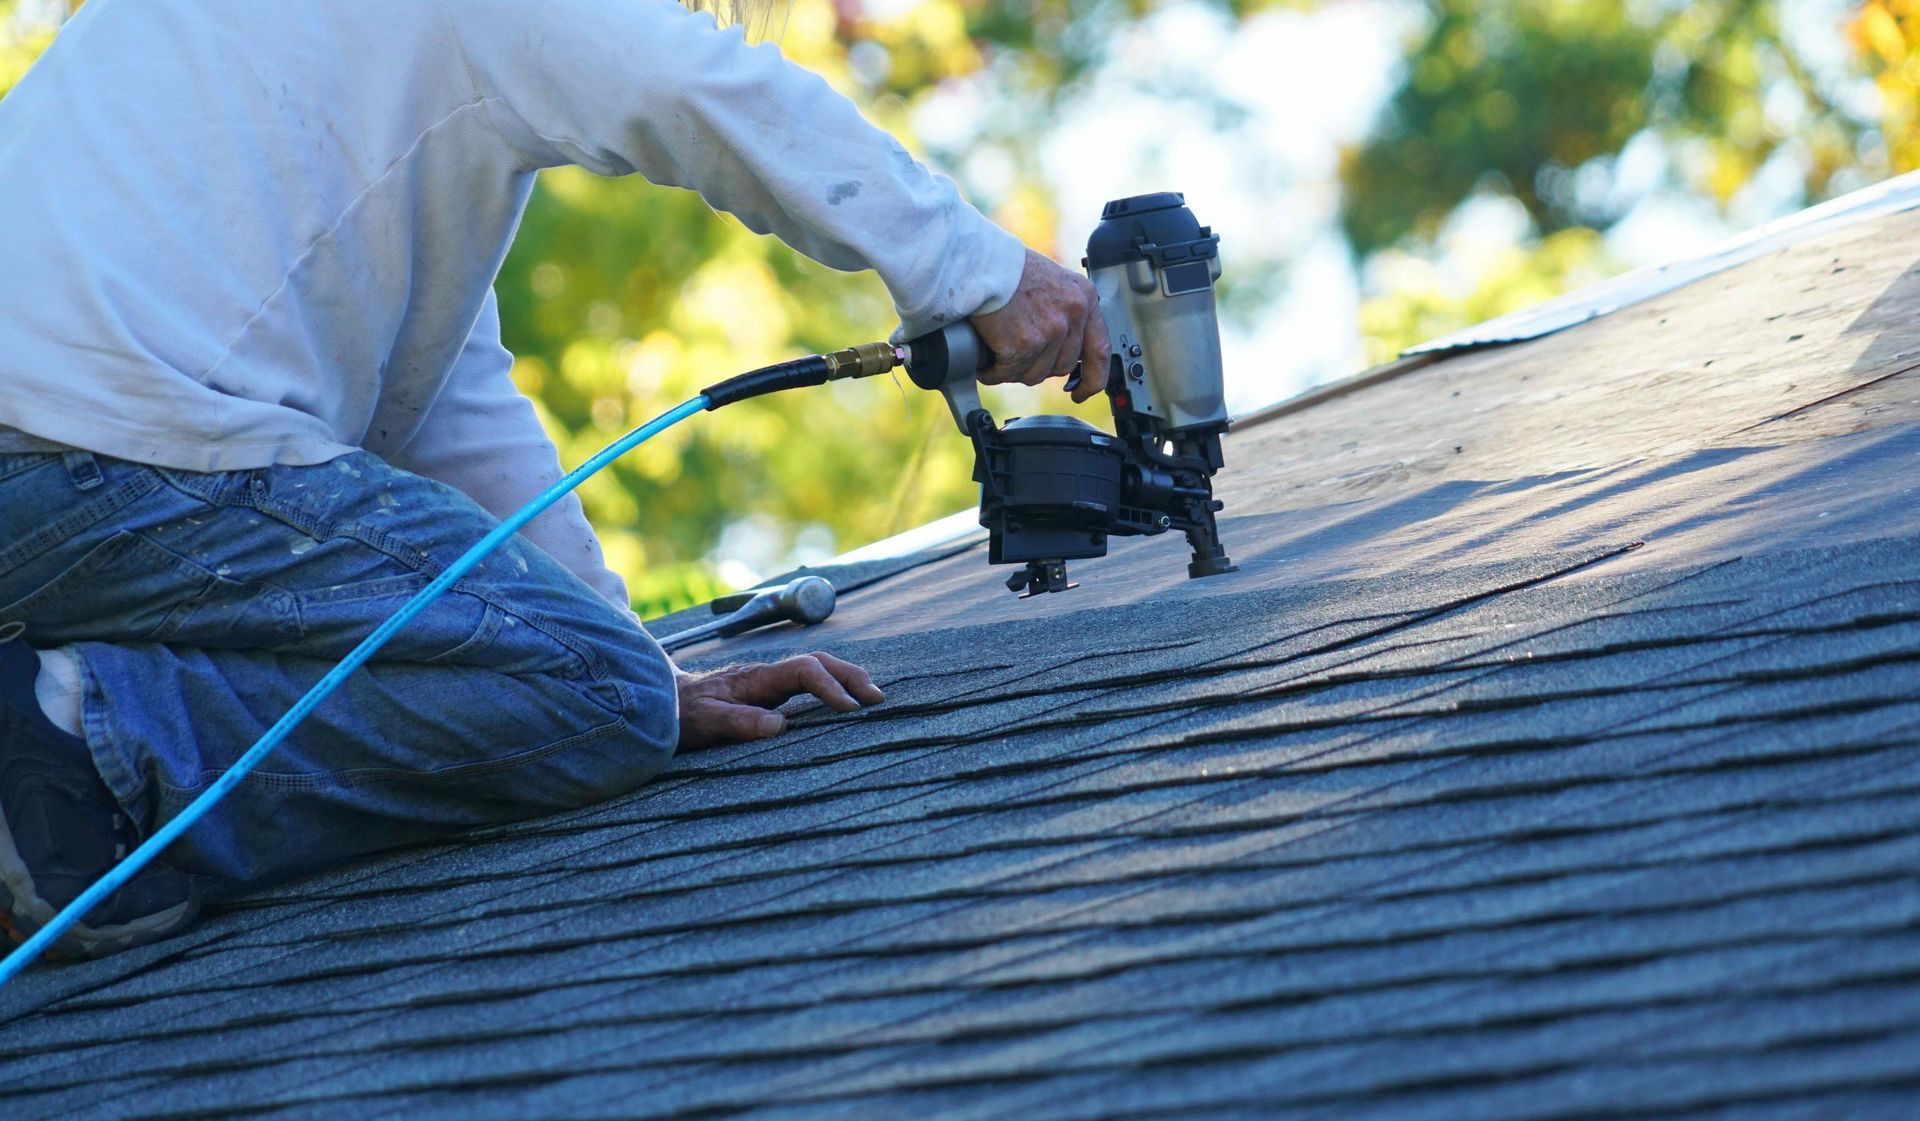 The Process of Roof Sealing